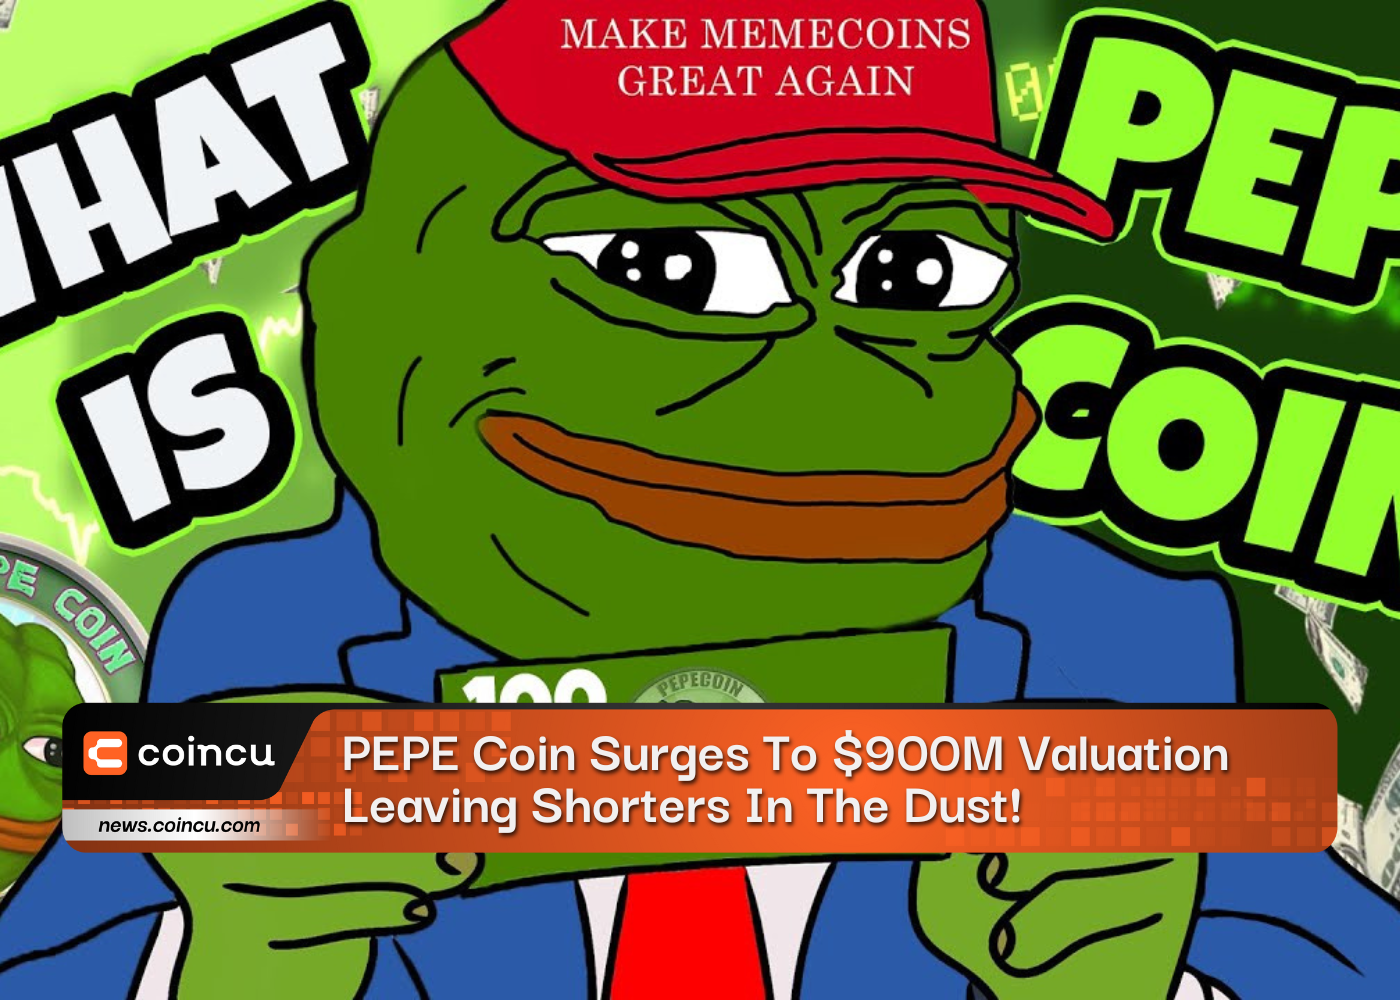 PEPE Coin Surges To 900M Valuation